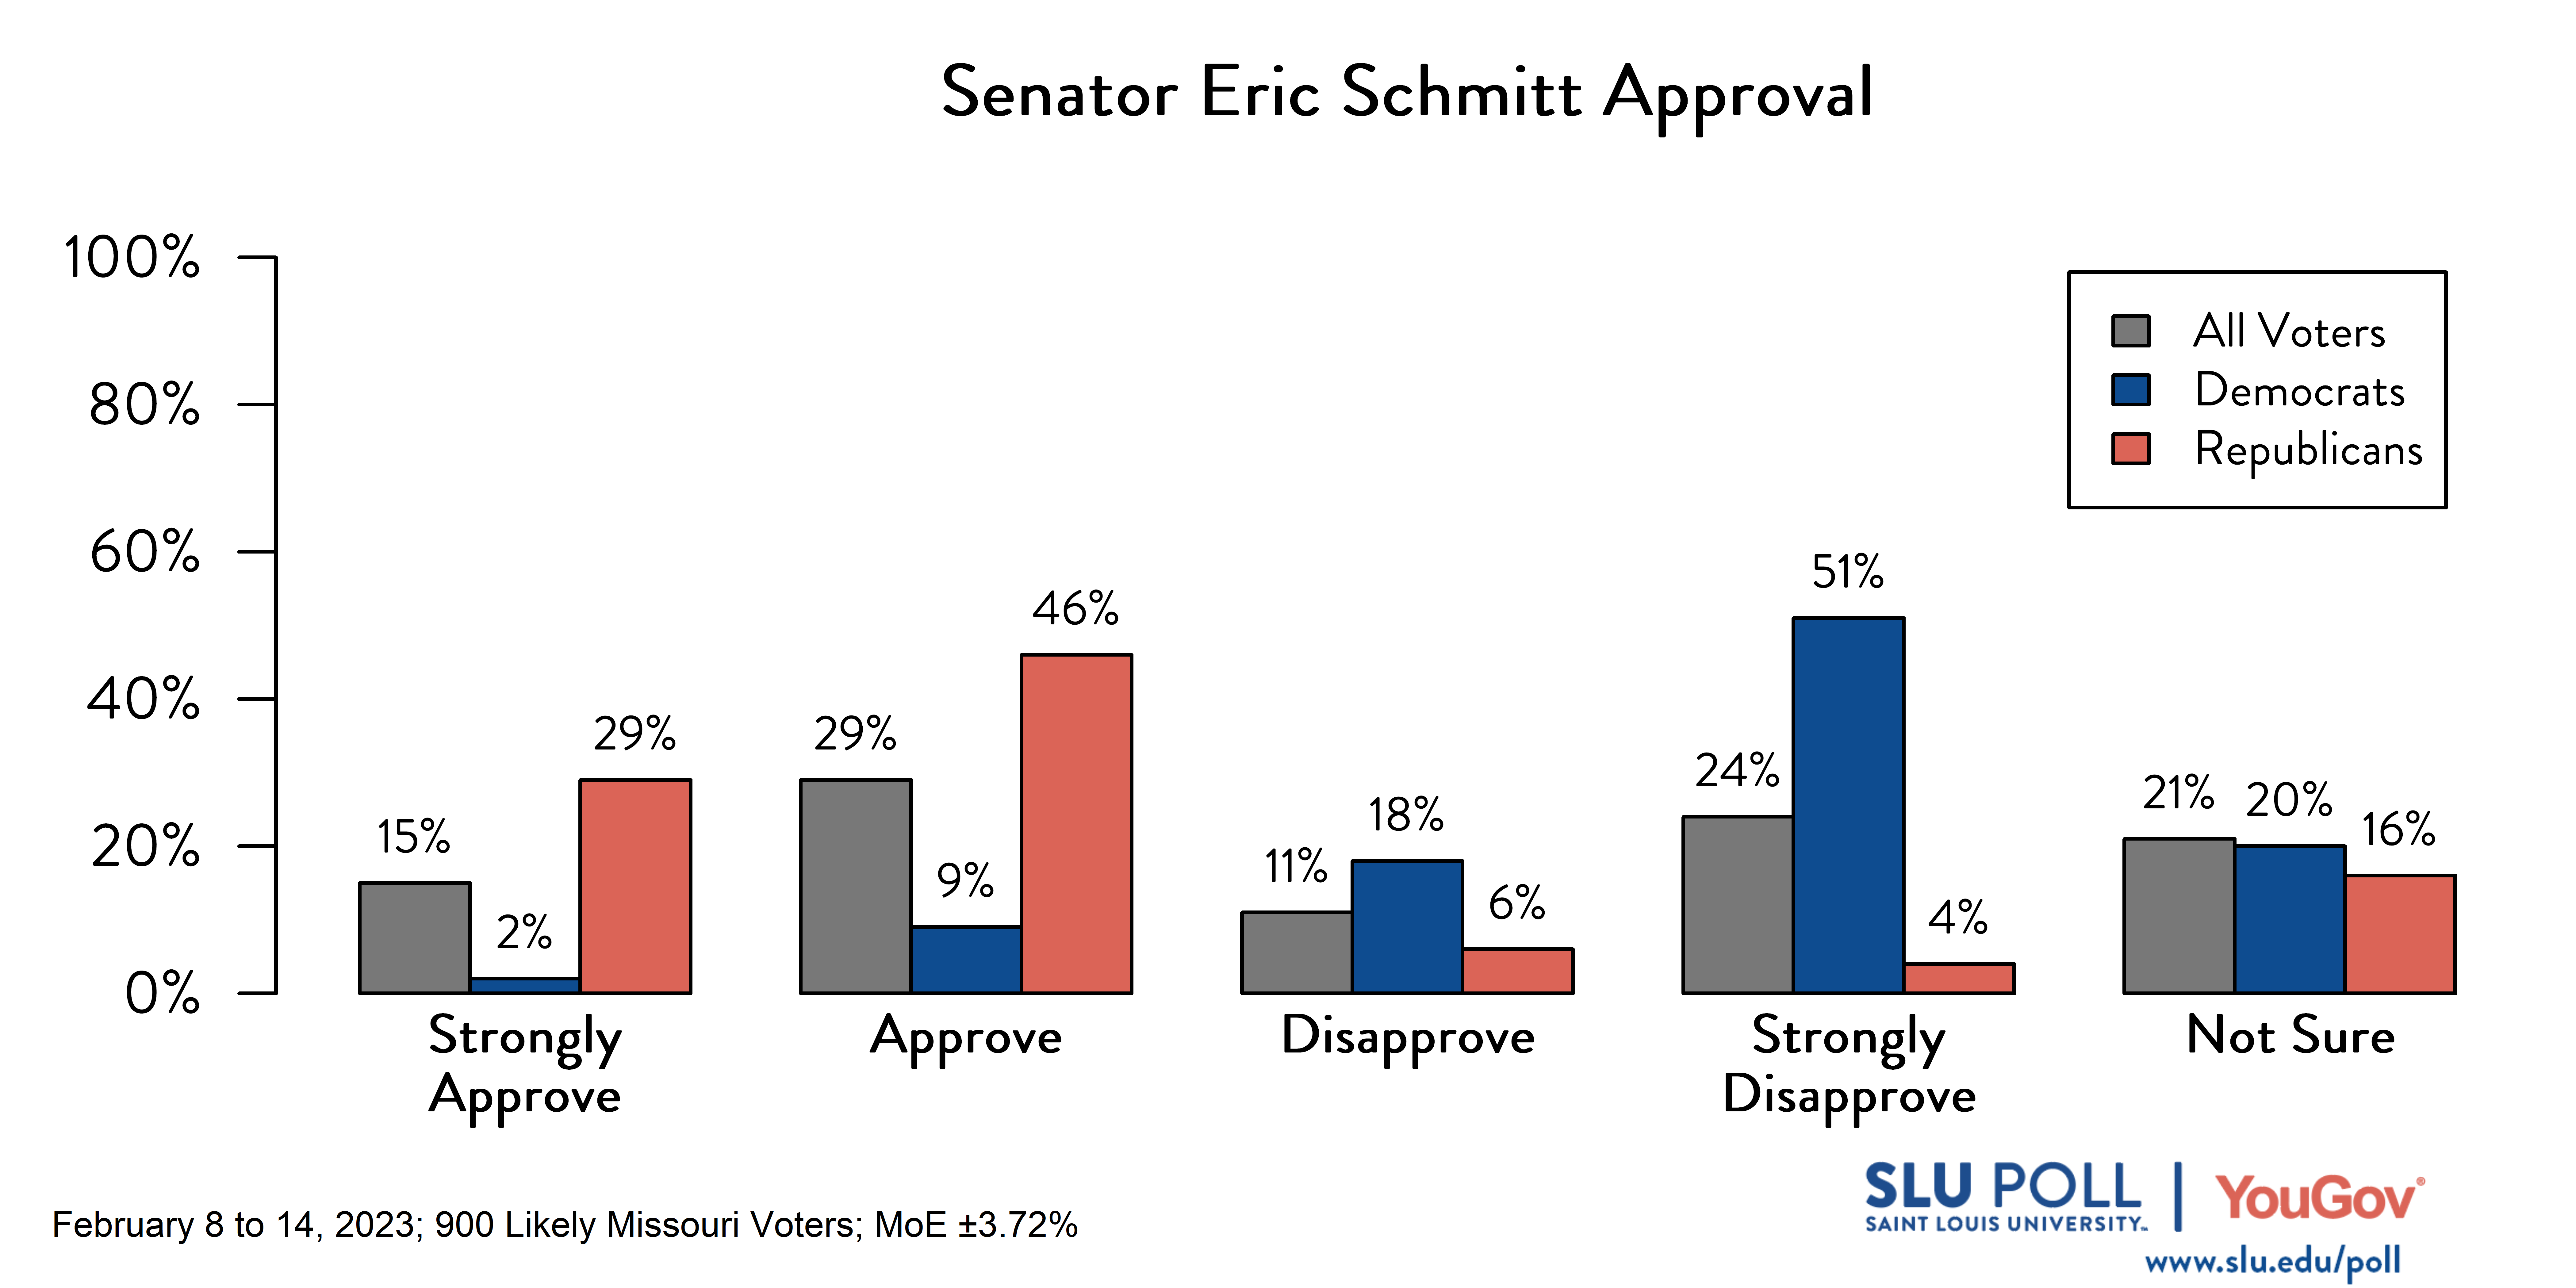 Likely voters' responses to 'Do you approve or disapprove of the way each is doing their job: Senator Eric Schmitt?': 15% Strongly approve, 29% Approve, 11% Disapprove, 24% Strongly disapprove, and 21% Not sure. Democratic voters' responses: ' 2% Strongly approve, 9% Approve, 18% Disapprove, 51% Strongly disapprove, and 20% Not sure. Republican voters' responses: 29% Strongly approve, 46% Approve, 6% Disapprove, 4% Strongly disapprove, and 16% Not sure. 